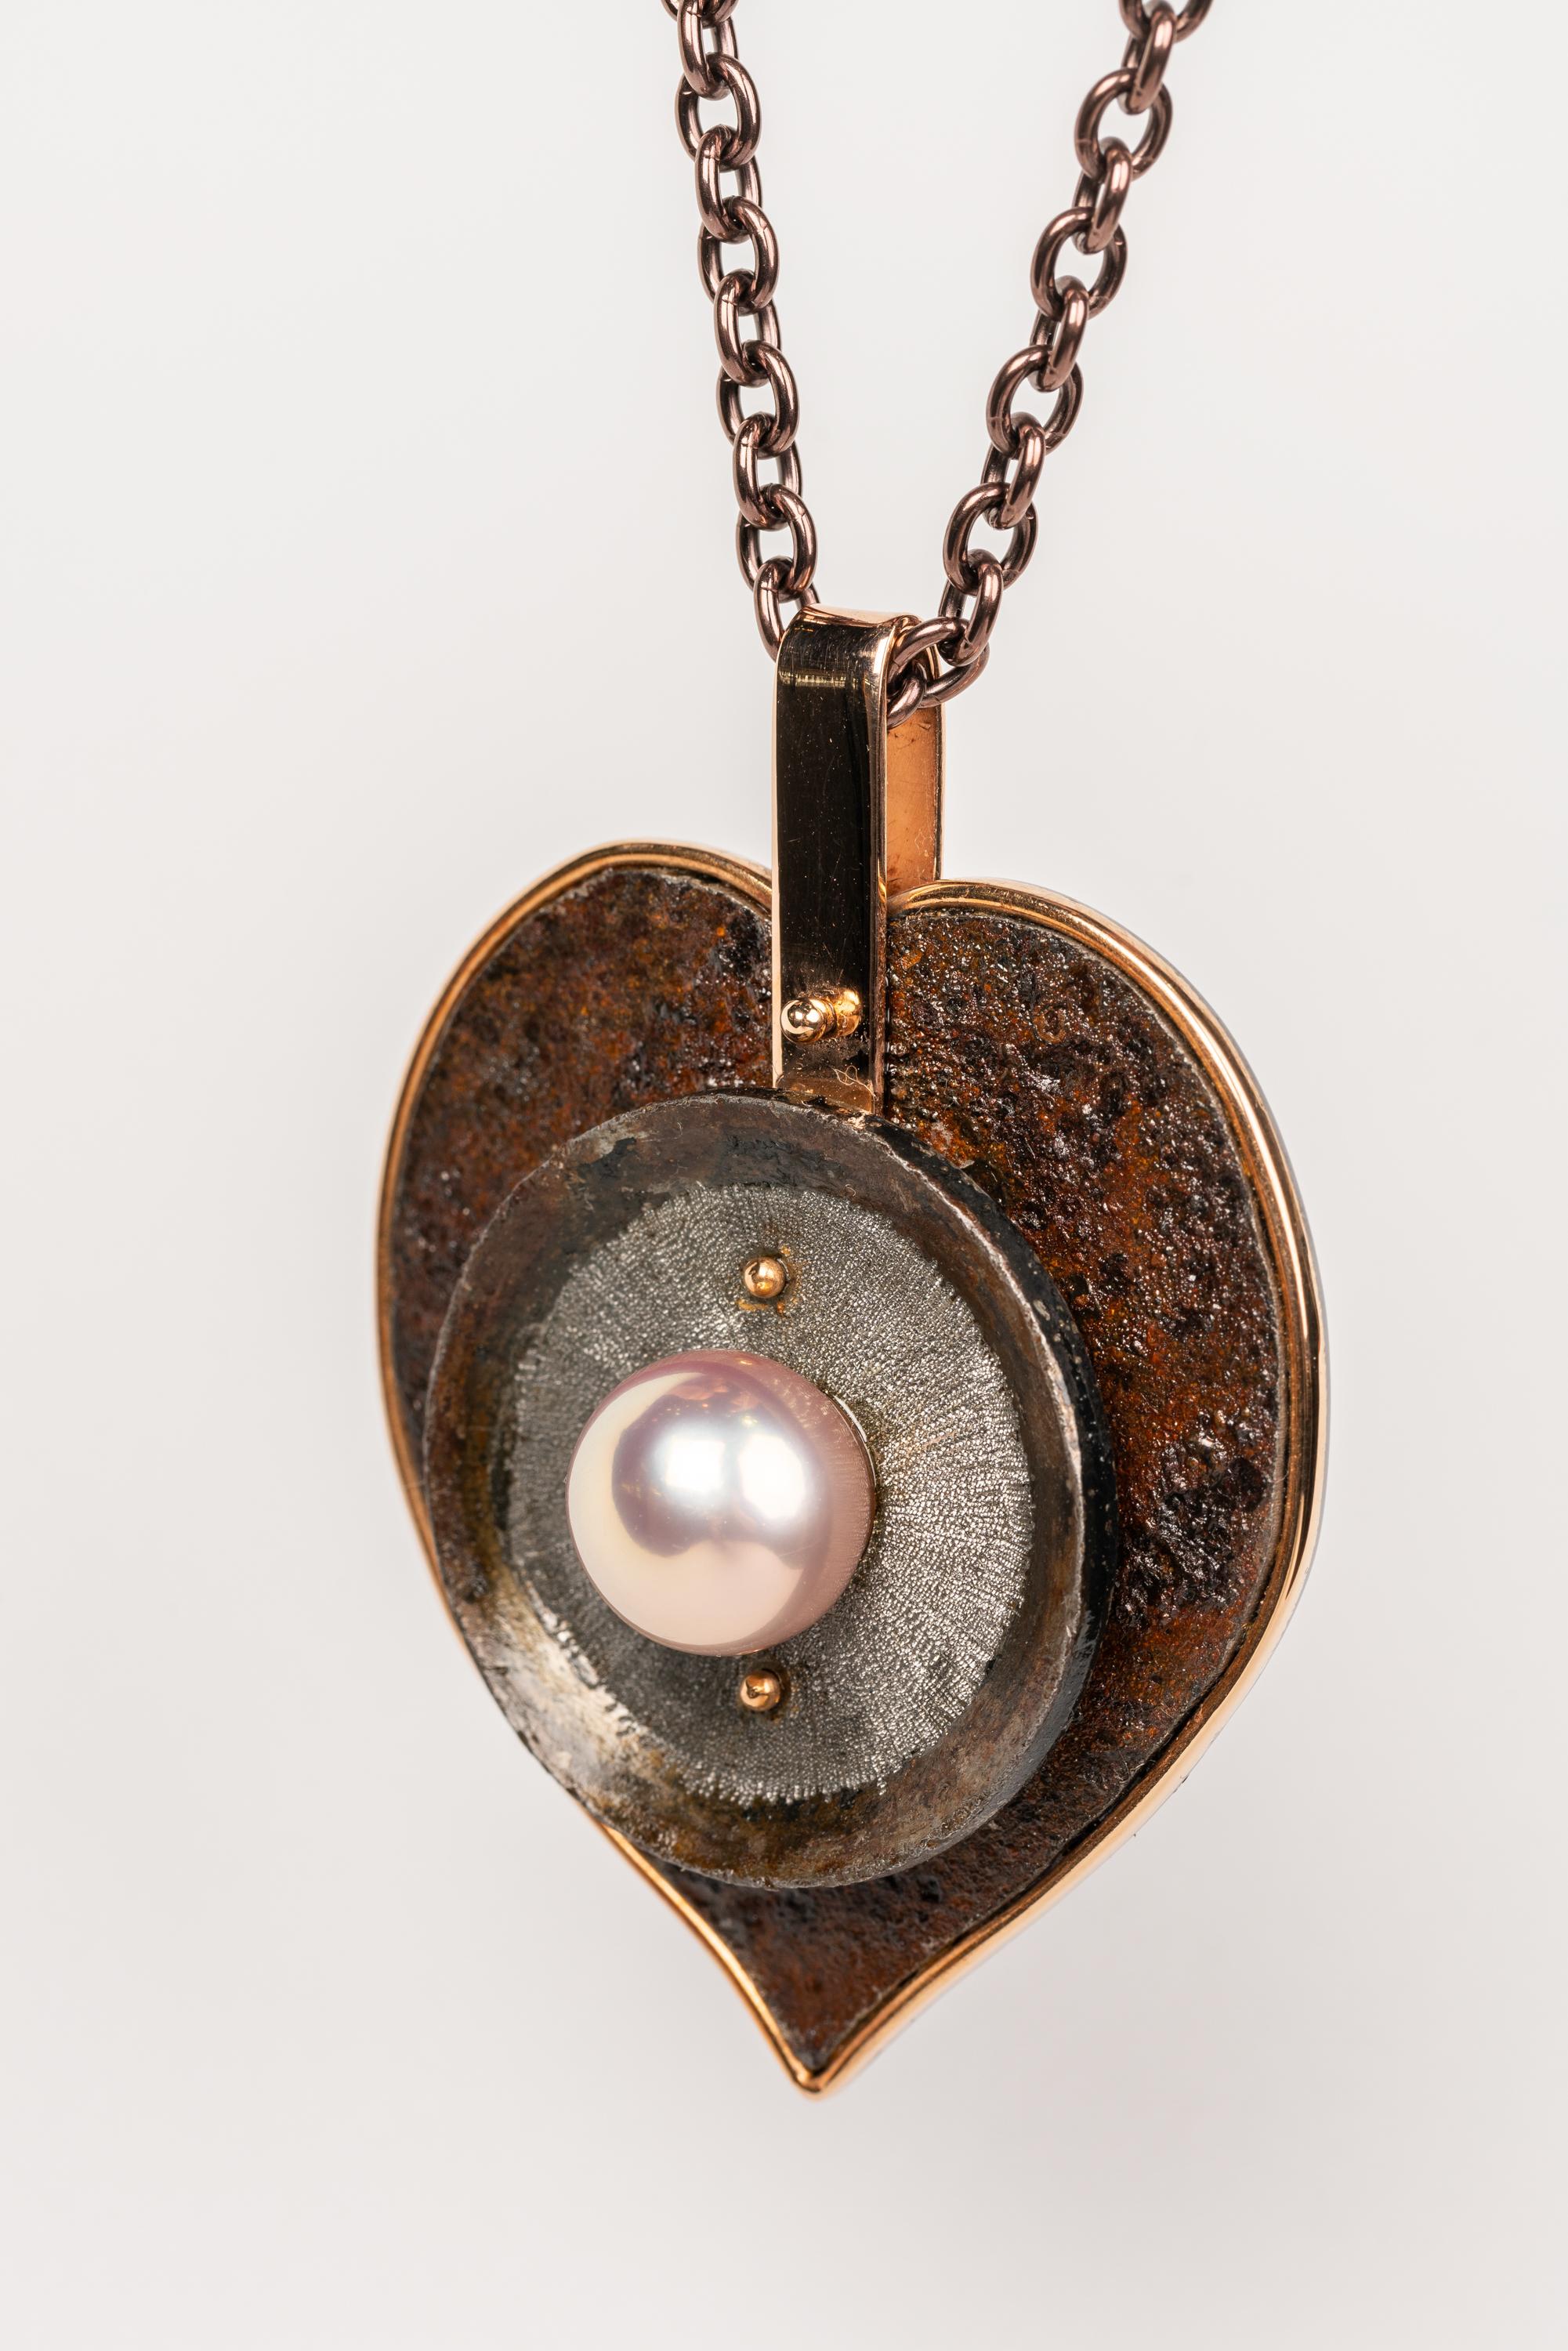 Contemporary 18 Karat, Sterling Silver, and Rusted Iron Heart Necklace with a South Sea Pearl